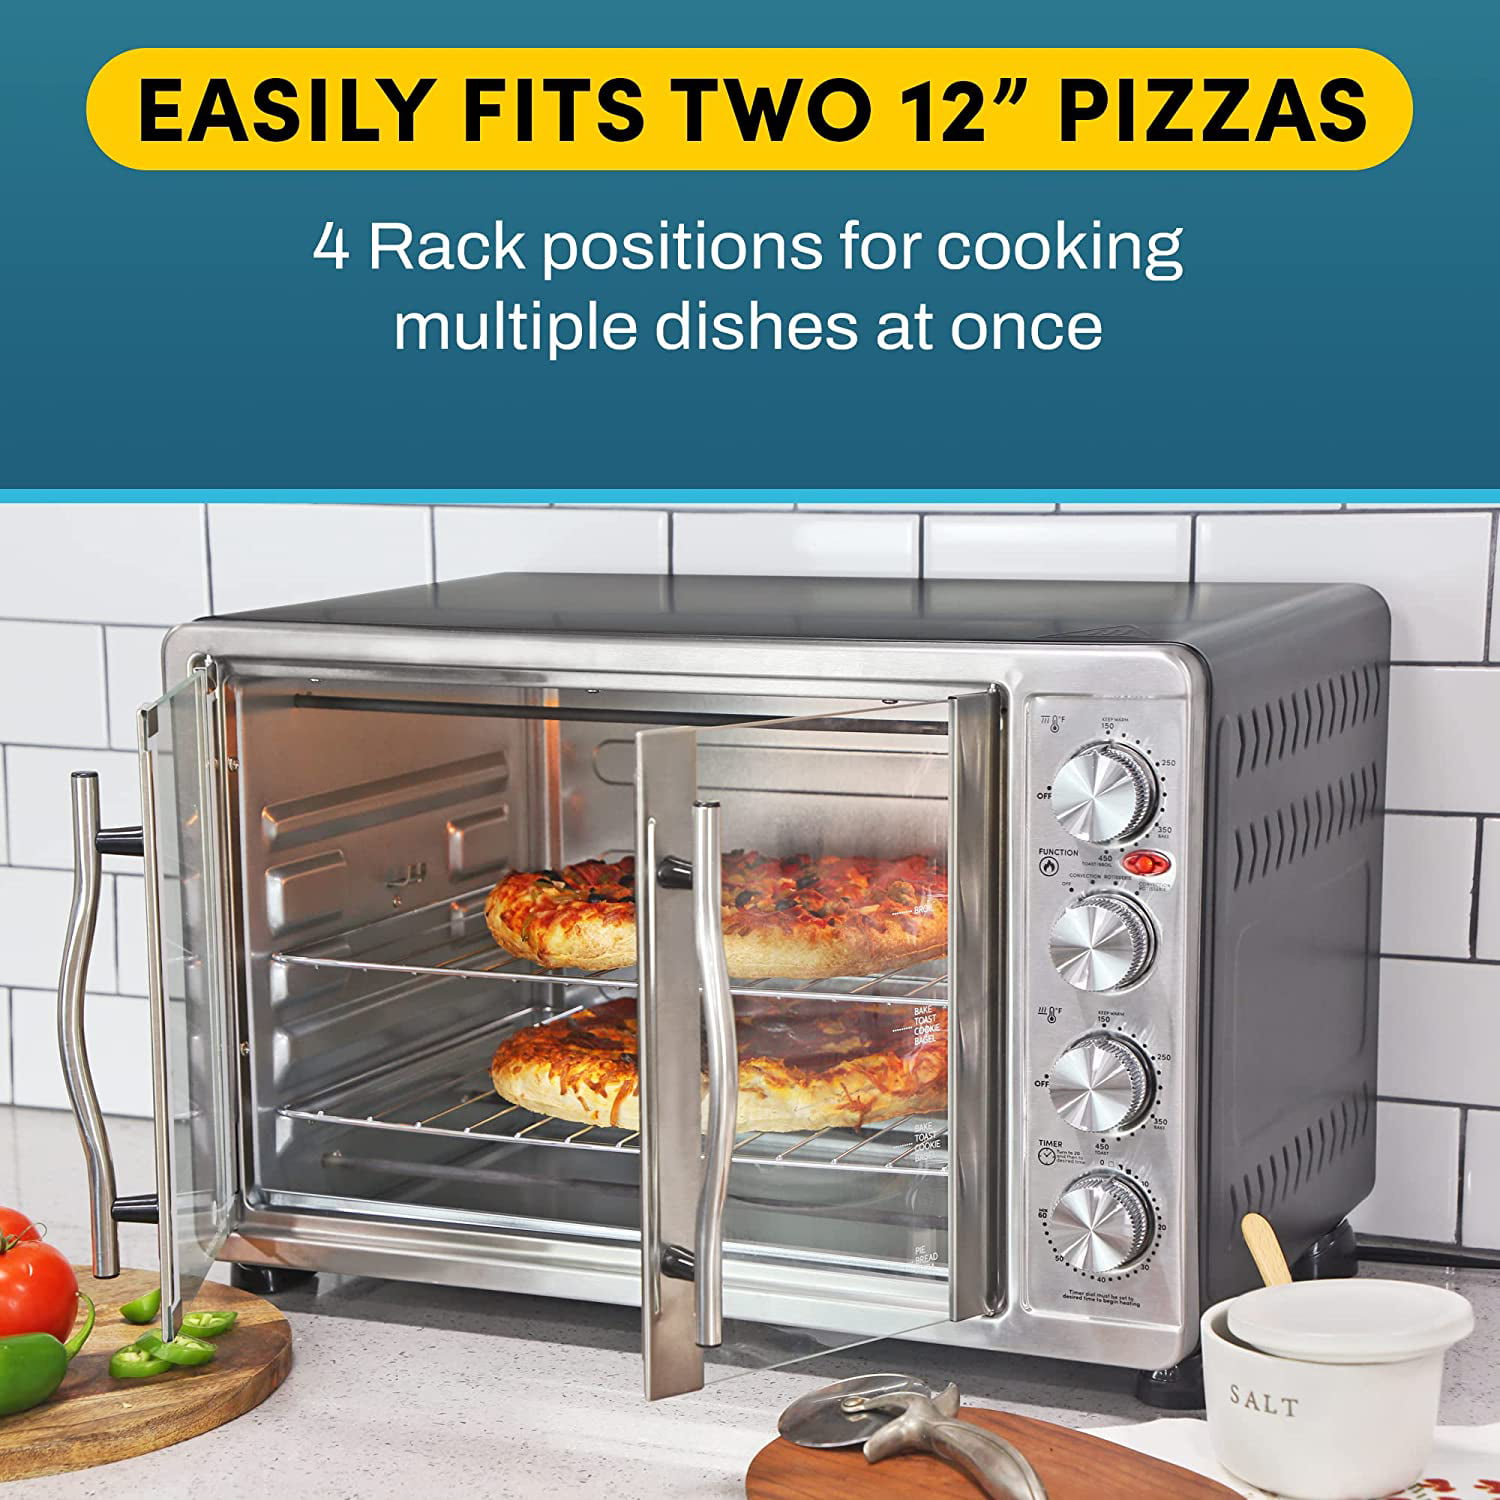 Elite Gourmet ETO4510B French Door 47.5Qt, 18-Slice Convection Oven  4-Control Knobs, Bake Broil Toast Rotisserie Keep Warm, Includes 2 x 14  Pizza